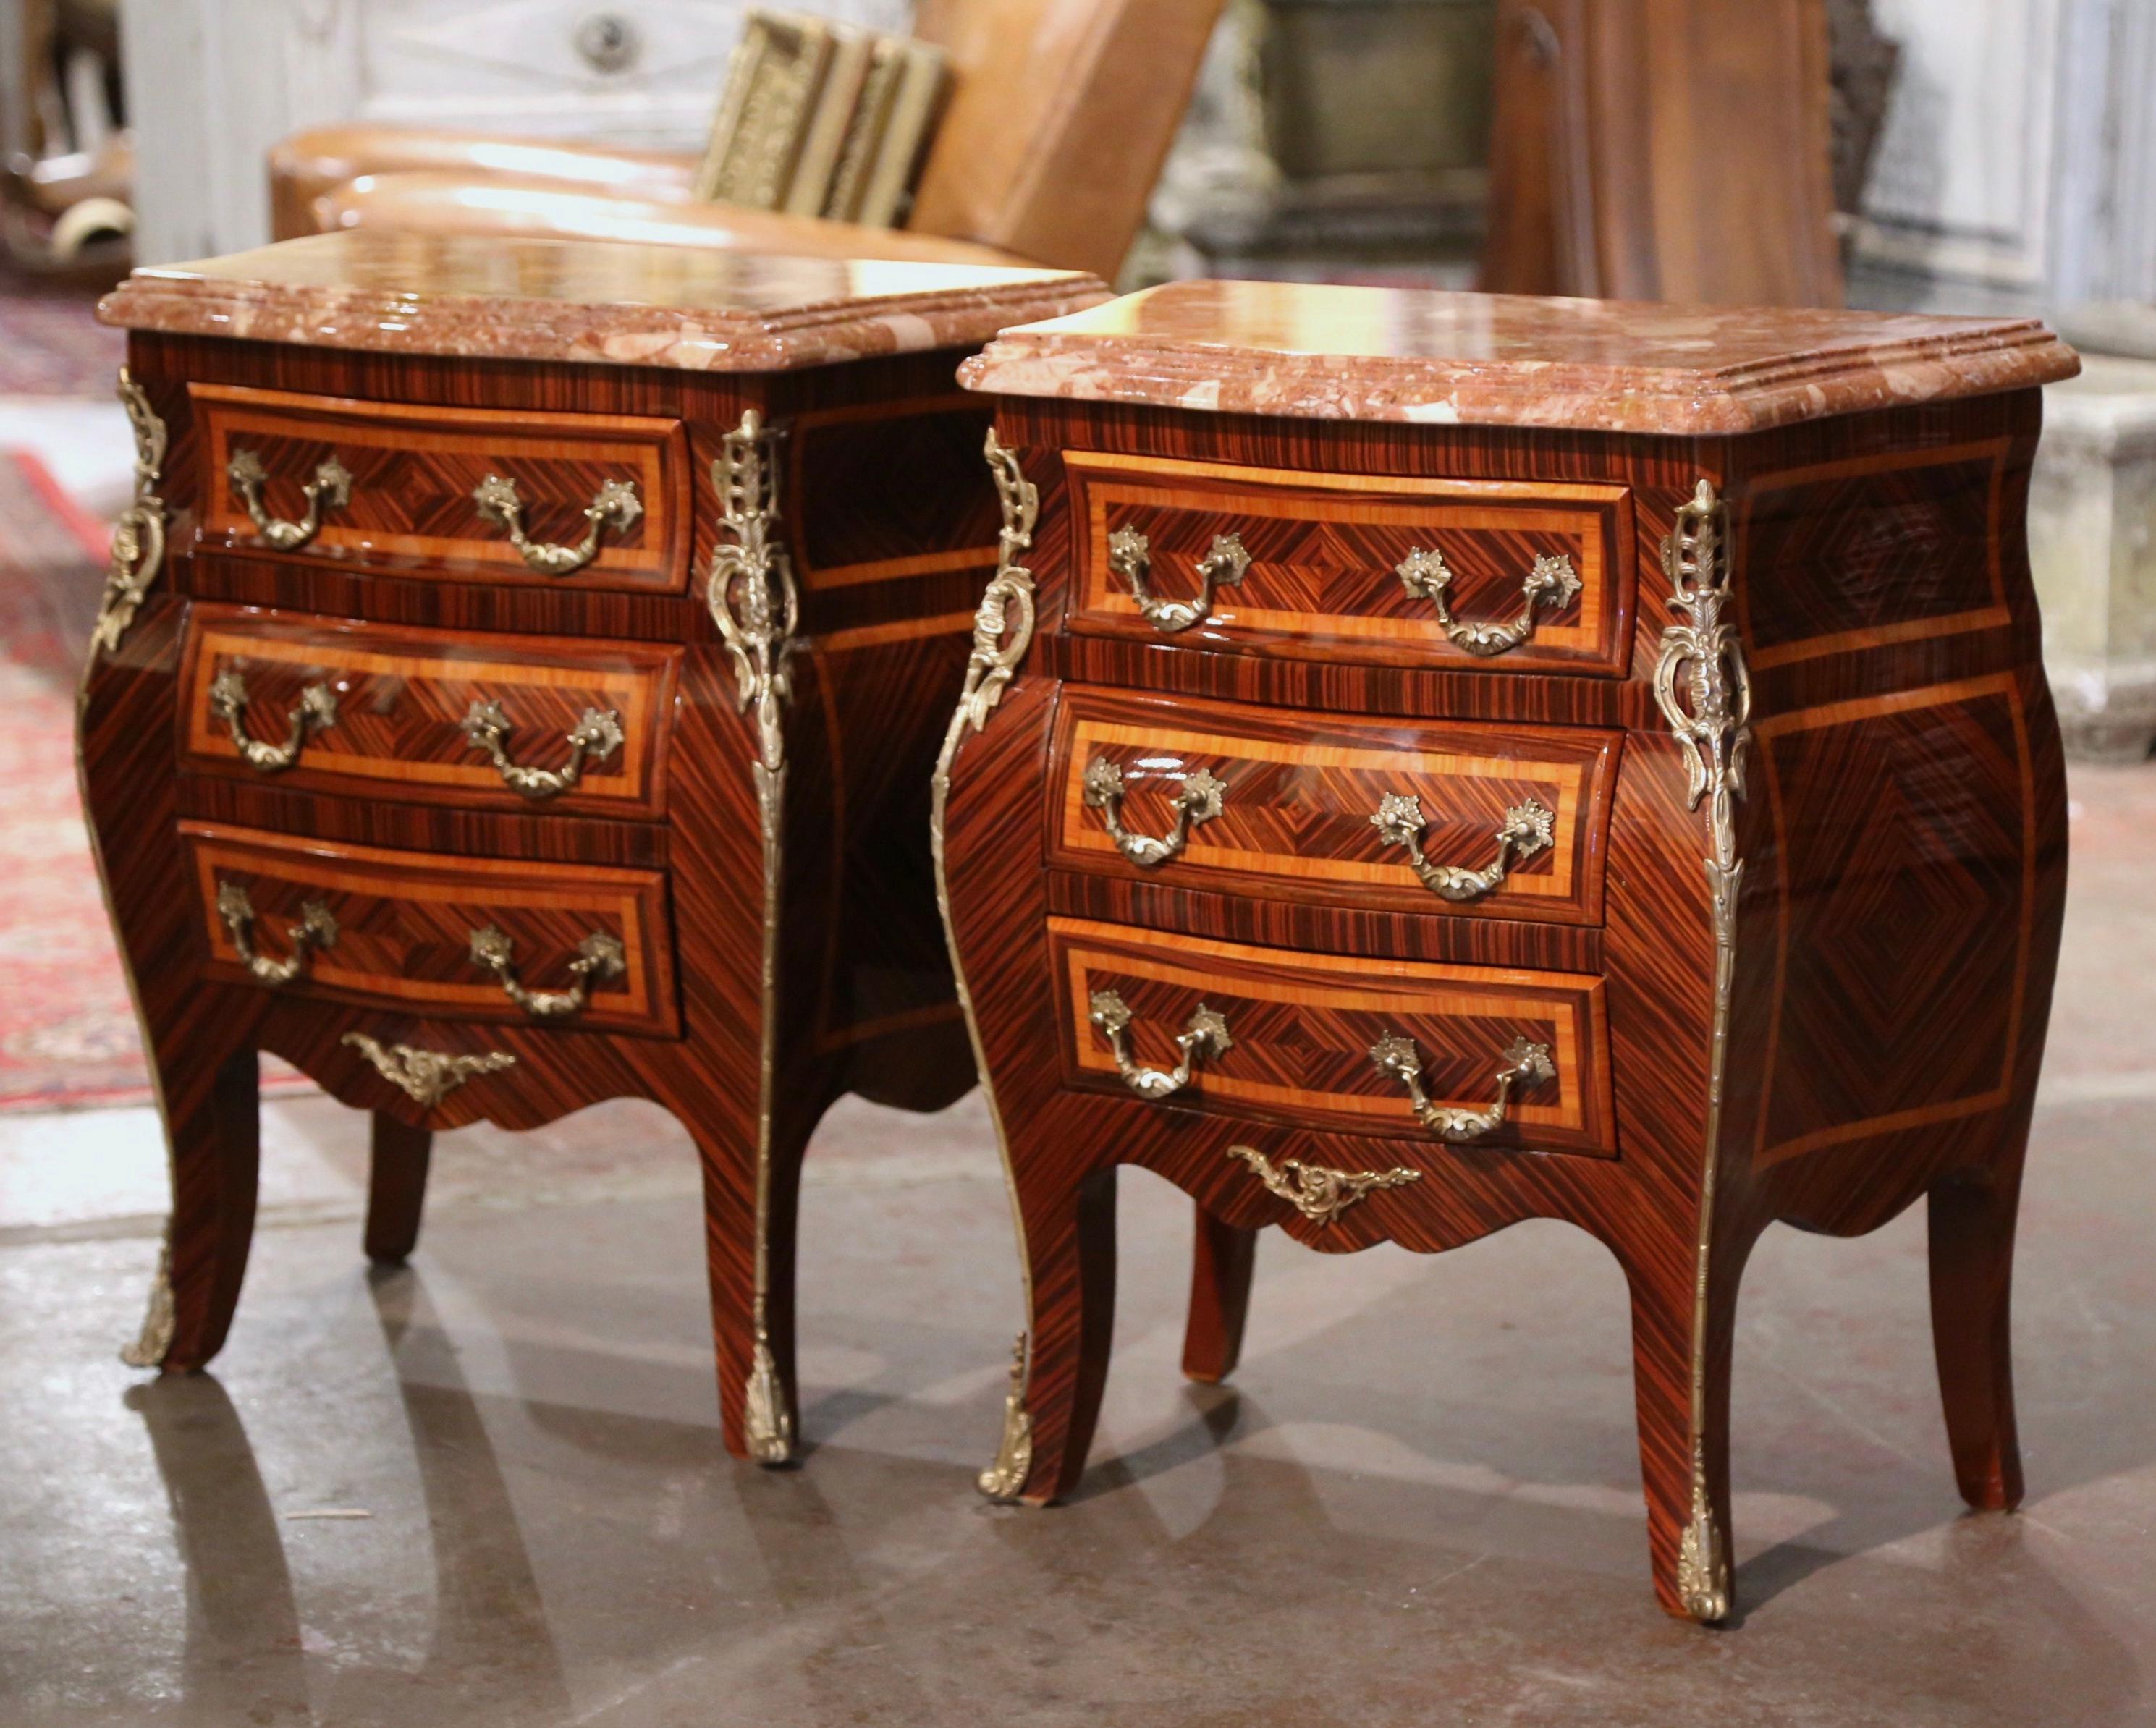 These elegant three-drawer bedside tables were created in France, circa 1980. Bombe in shape on all three sides, each chest stands on cabriole legs ending with bronze sabot feet over a scalloped apron embellished with a brass mount; the sides with